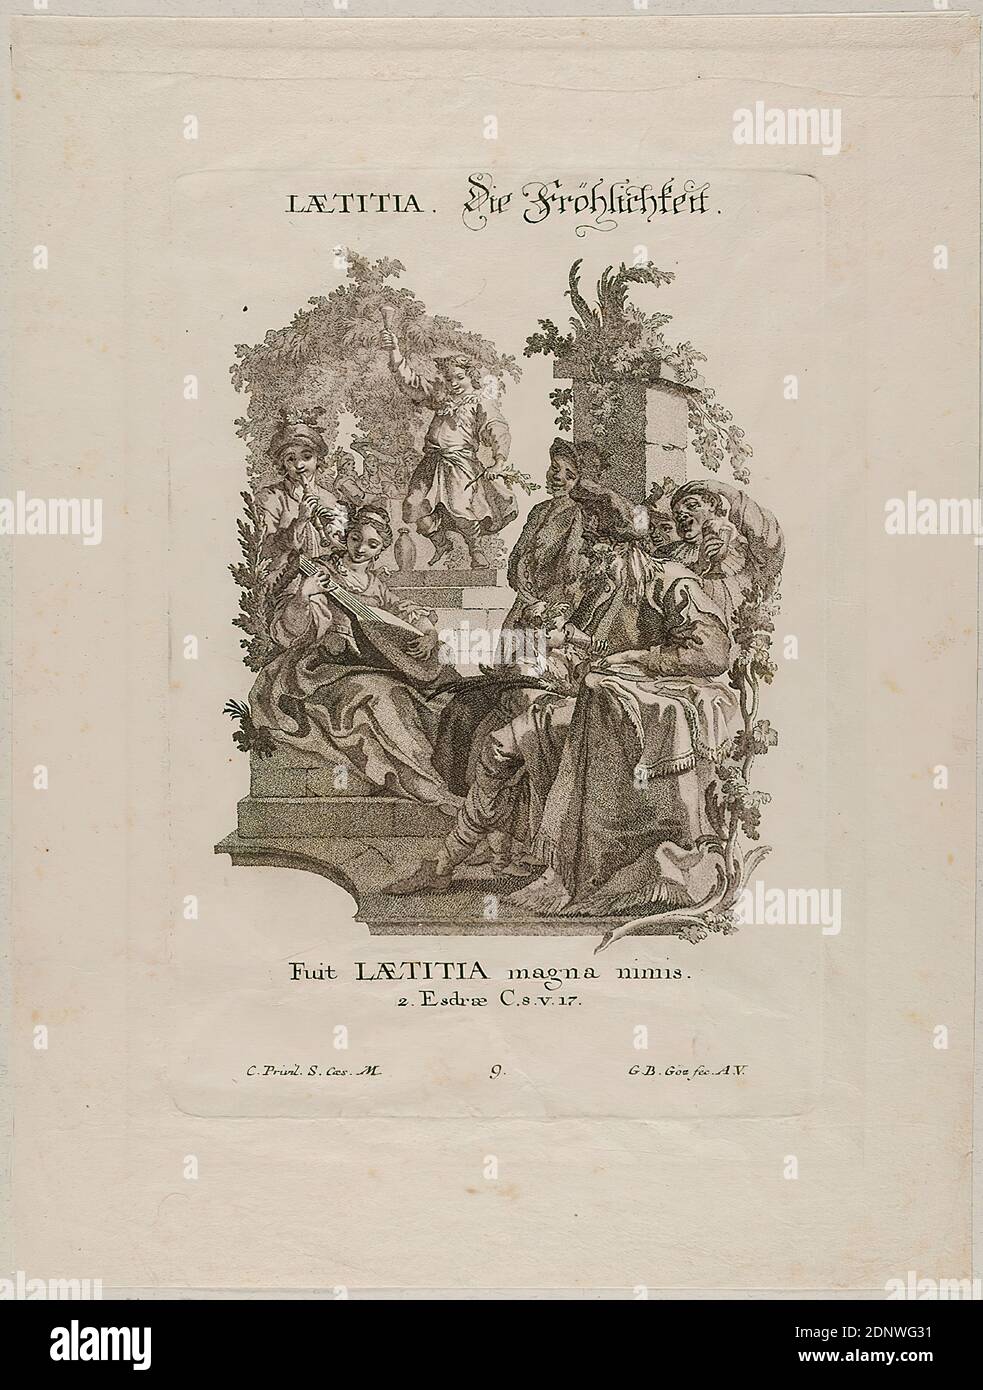 Gottfried Bernhard Göz, Die Fröhlichkeit, Punktiermanier, sheet size: height: 23,70 cm; width: 18,00 cm, signed, inscribed and numbered on the plate: LAETITIA. The Happiness, Fuit LAETITIA magna nimis. 2 Esdrae C. S. V. 17th, C. Privil. S. caes. M, 9th, G. B. Göz fec. A. V, prints, printed matter, Old Testament, Rocaille, sheet 9 from the series Passiones Animi aequae bonae ac malae, figuris biblicis Penicillo The good and bad sufferers of the human mind presented in biblical stories Stock Photo